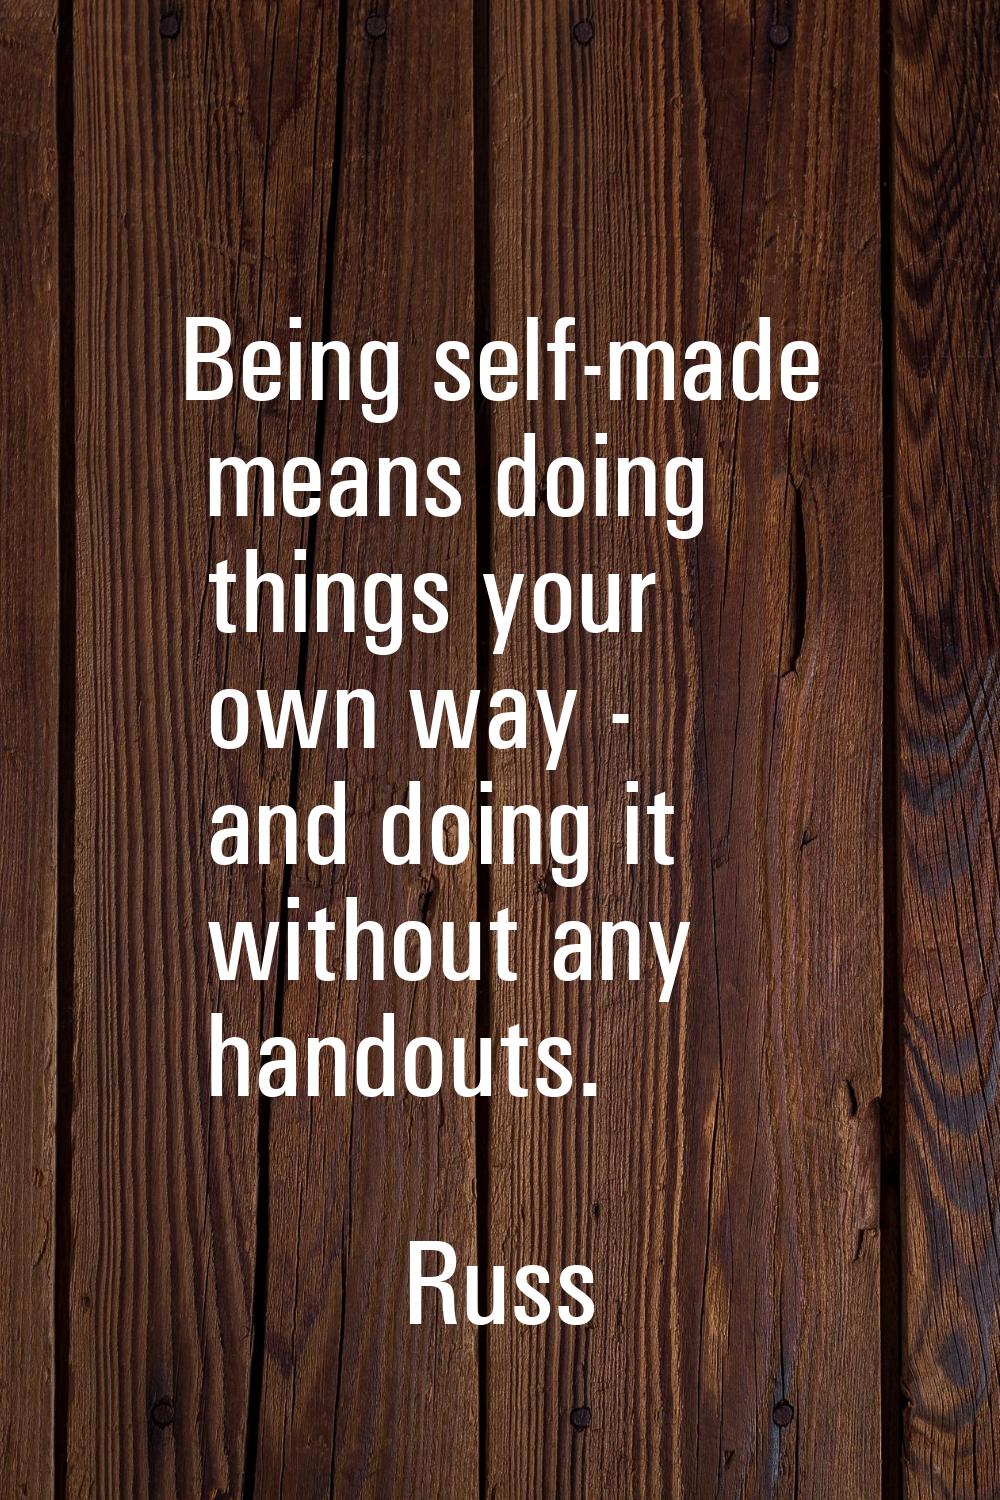 Being self-made means doing things your own way - and doing it without any handouts.